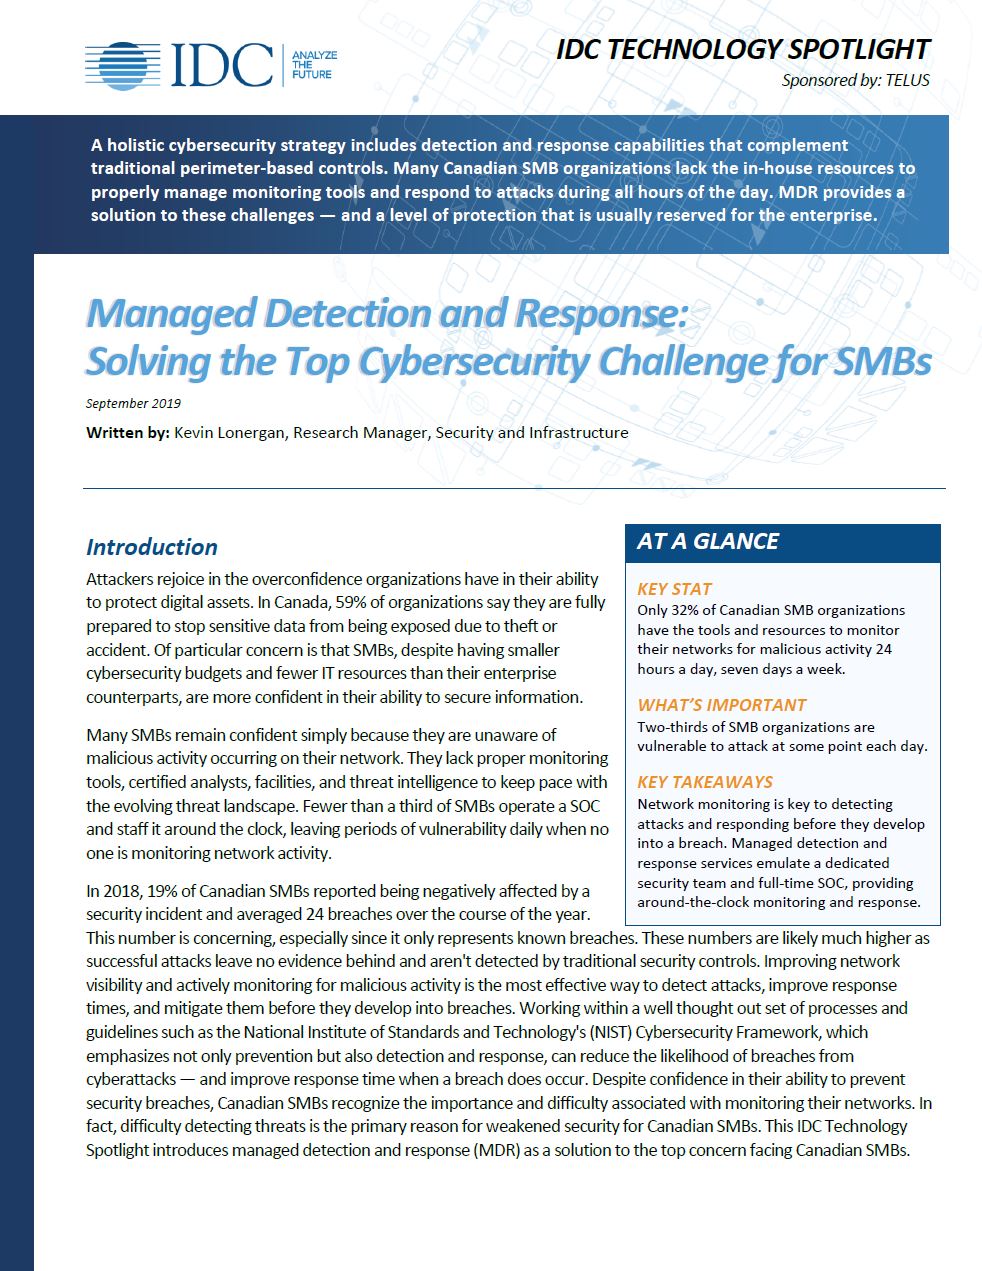 IDC Technology Spotlight - Managed Detection and Response Solving the top cybersecurity challenge for SMBs